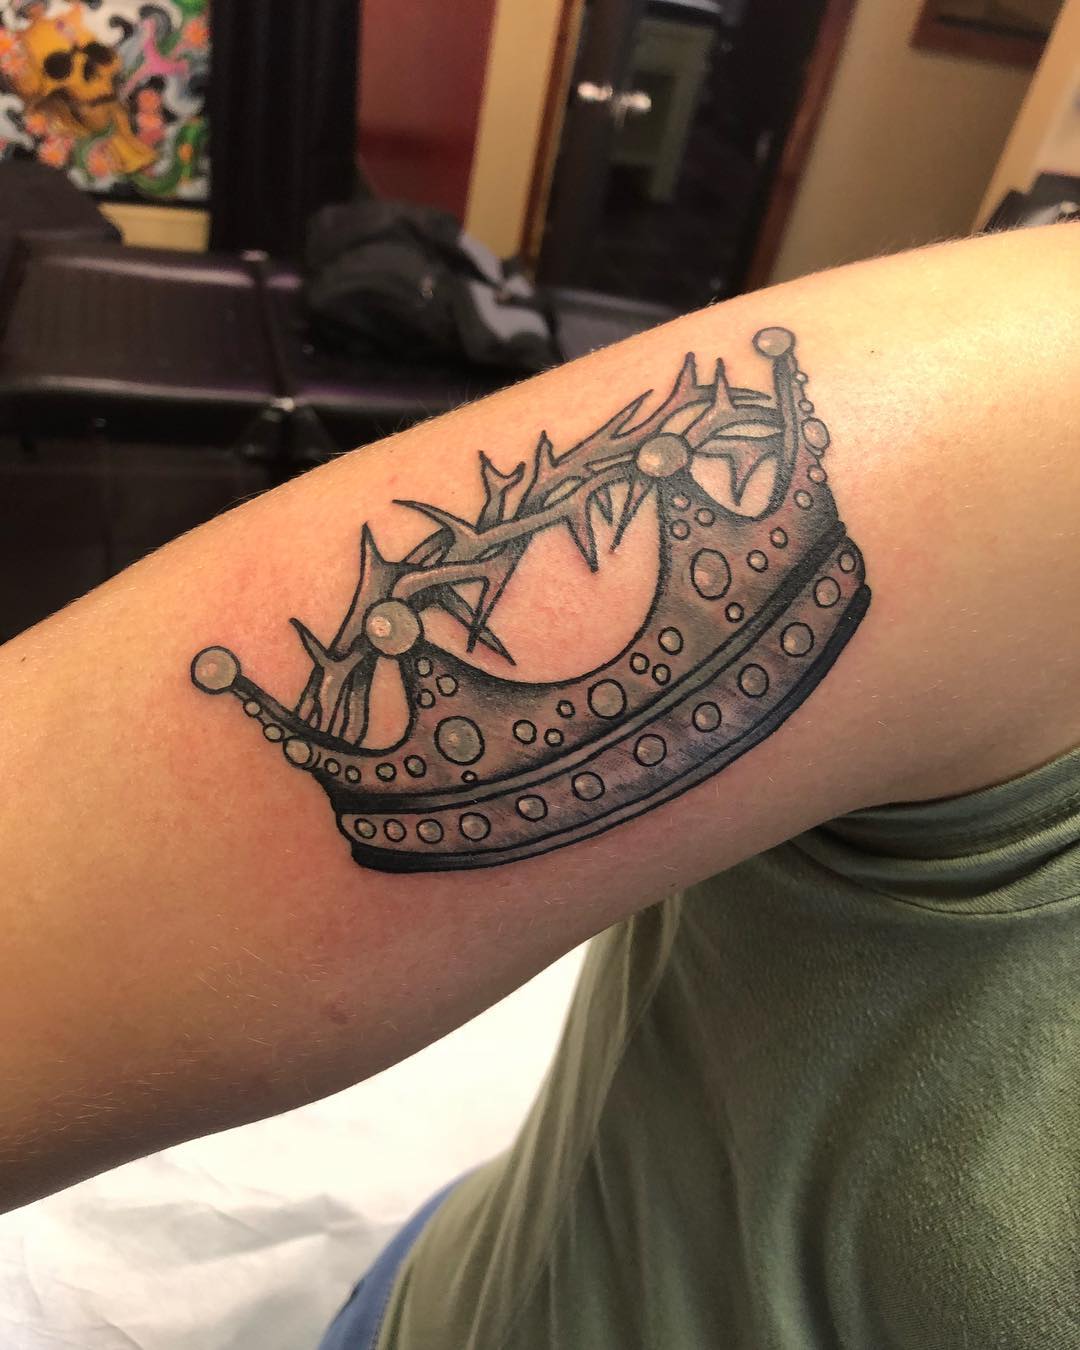 15 Powerful King Tattoo Designs for Strength and Authority